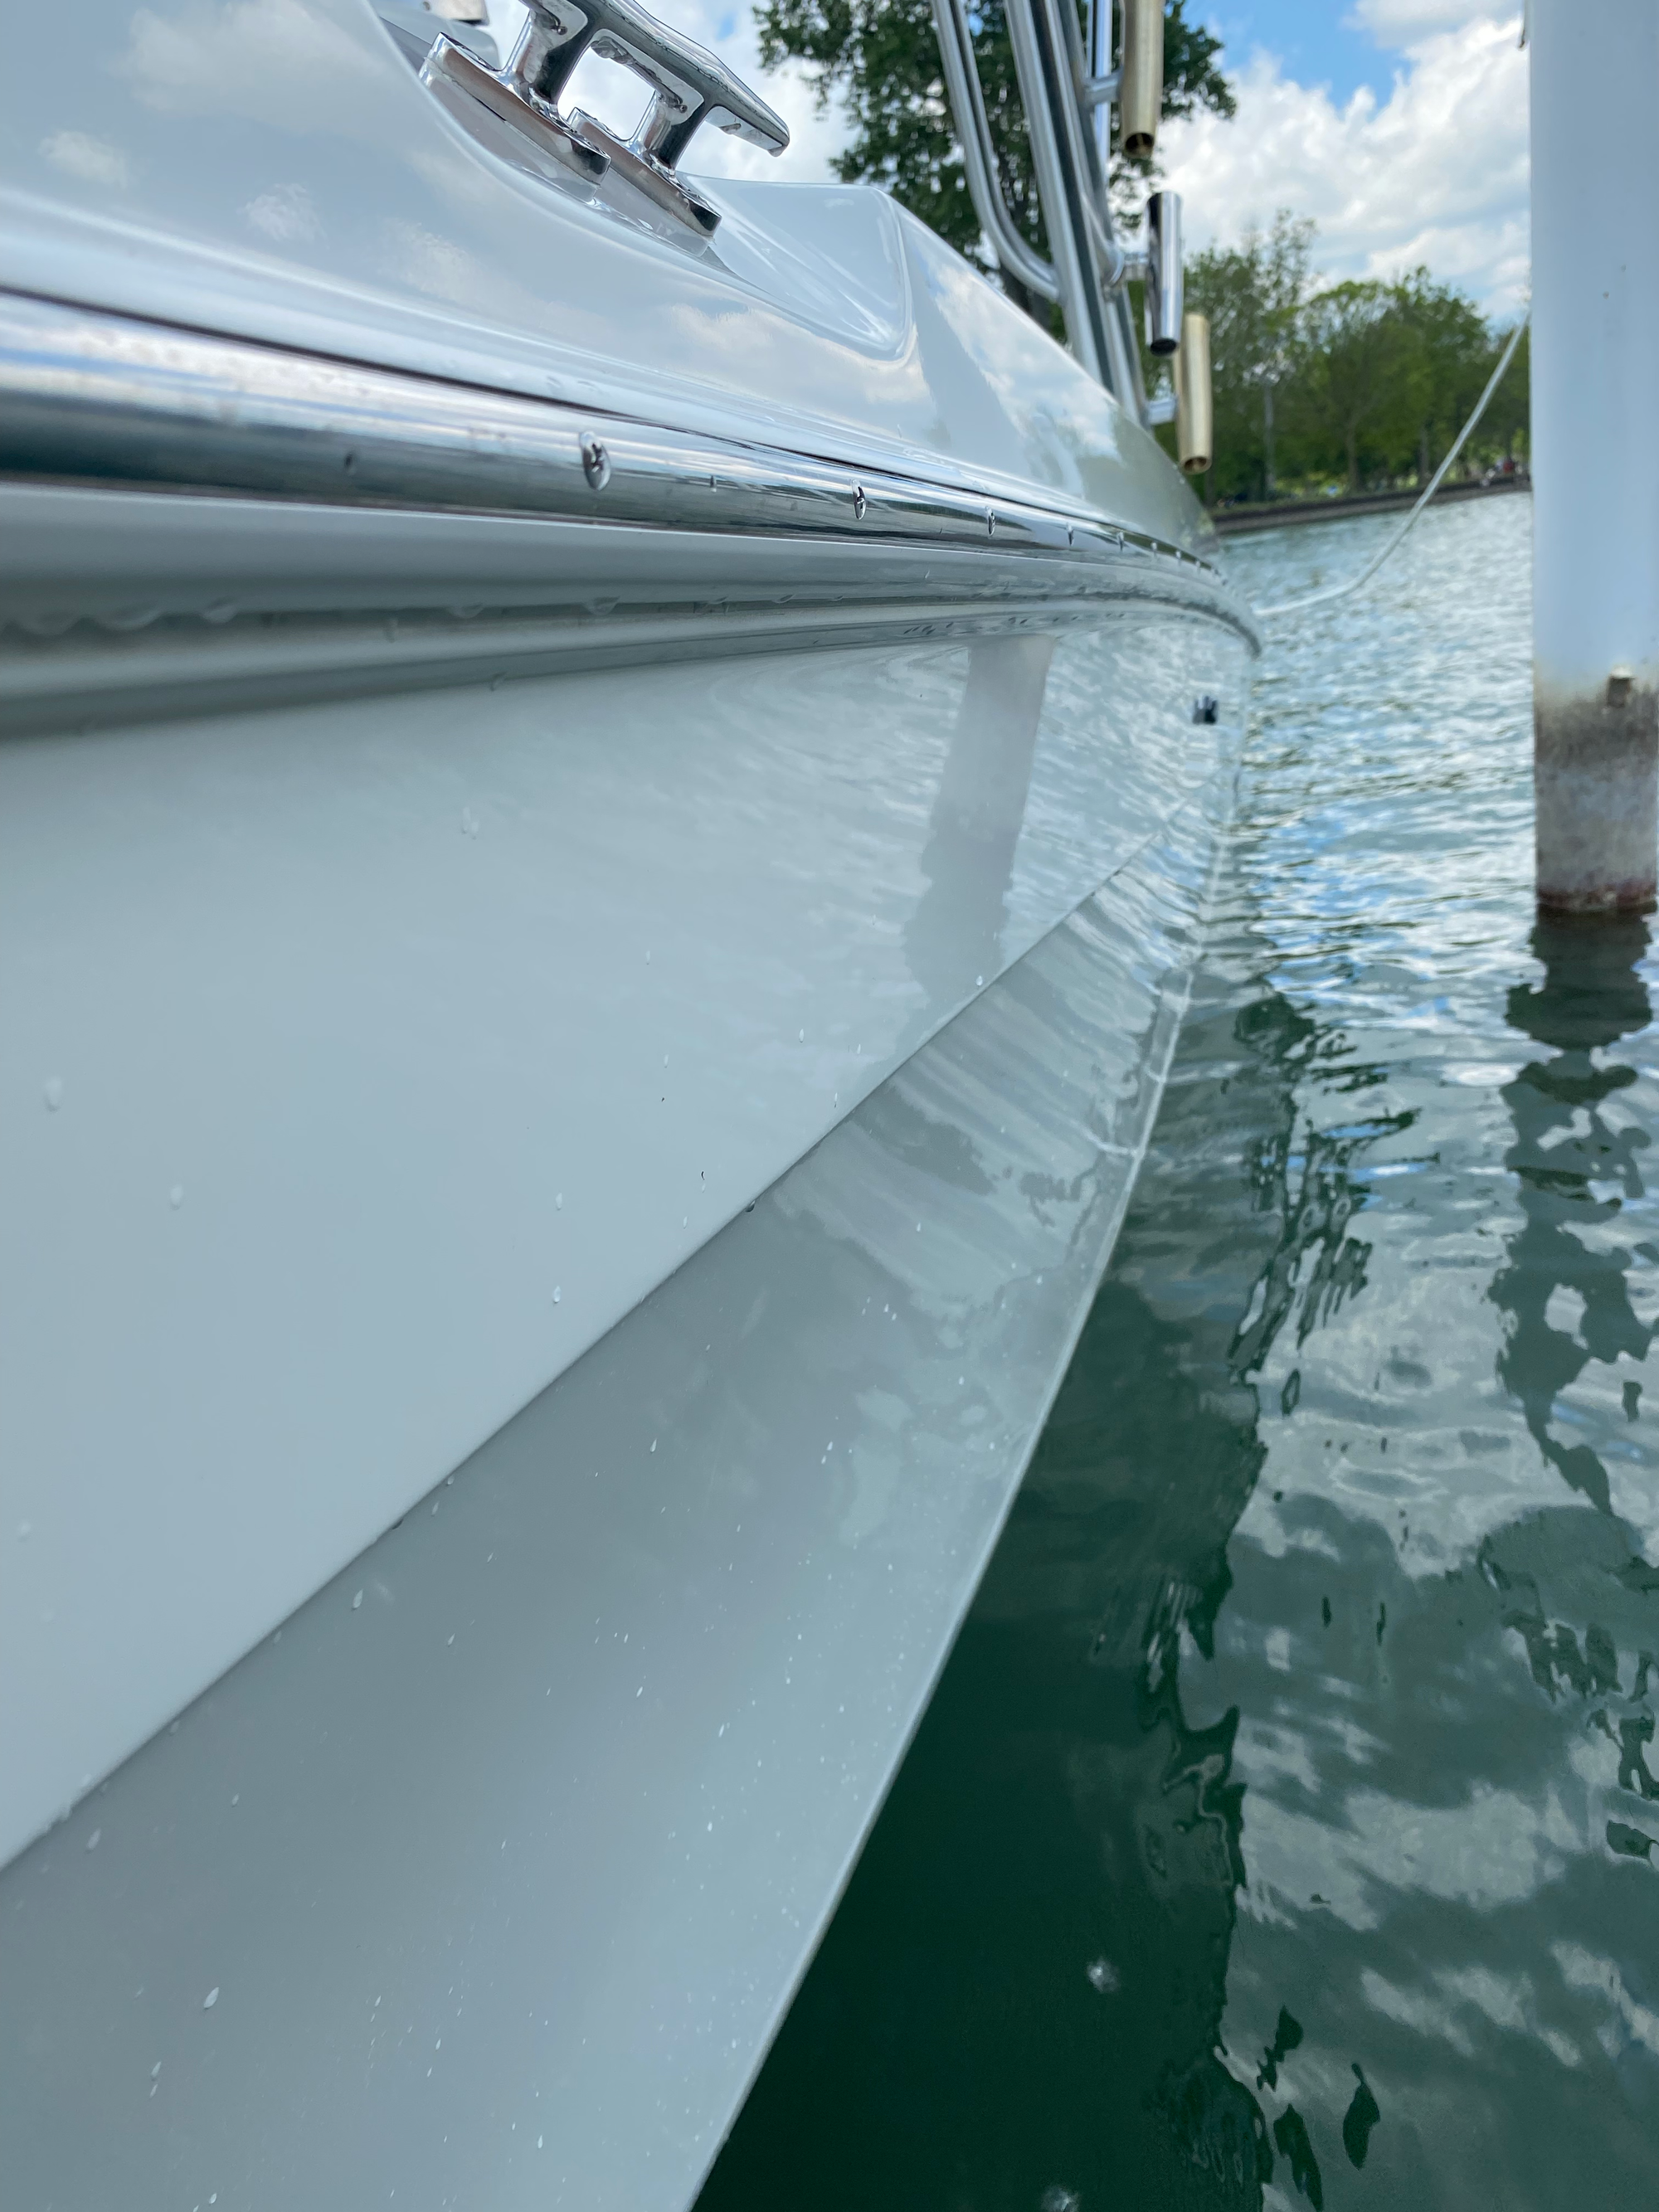 picture of a boats shiny hull side while sitting at the dock